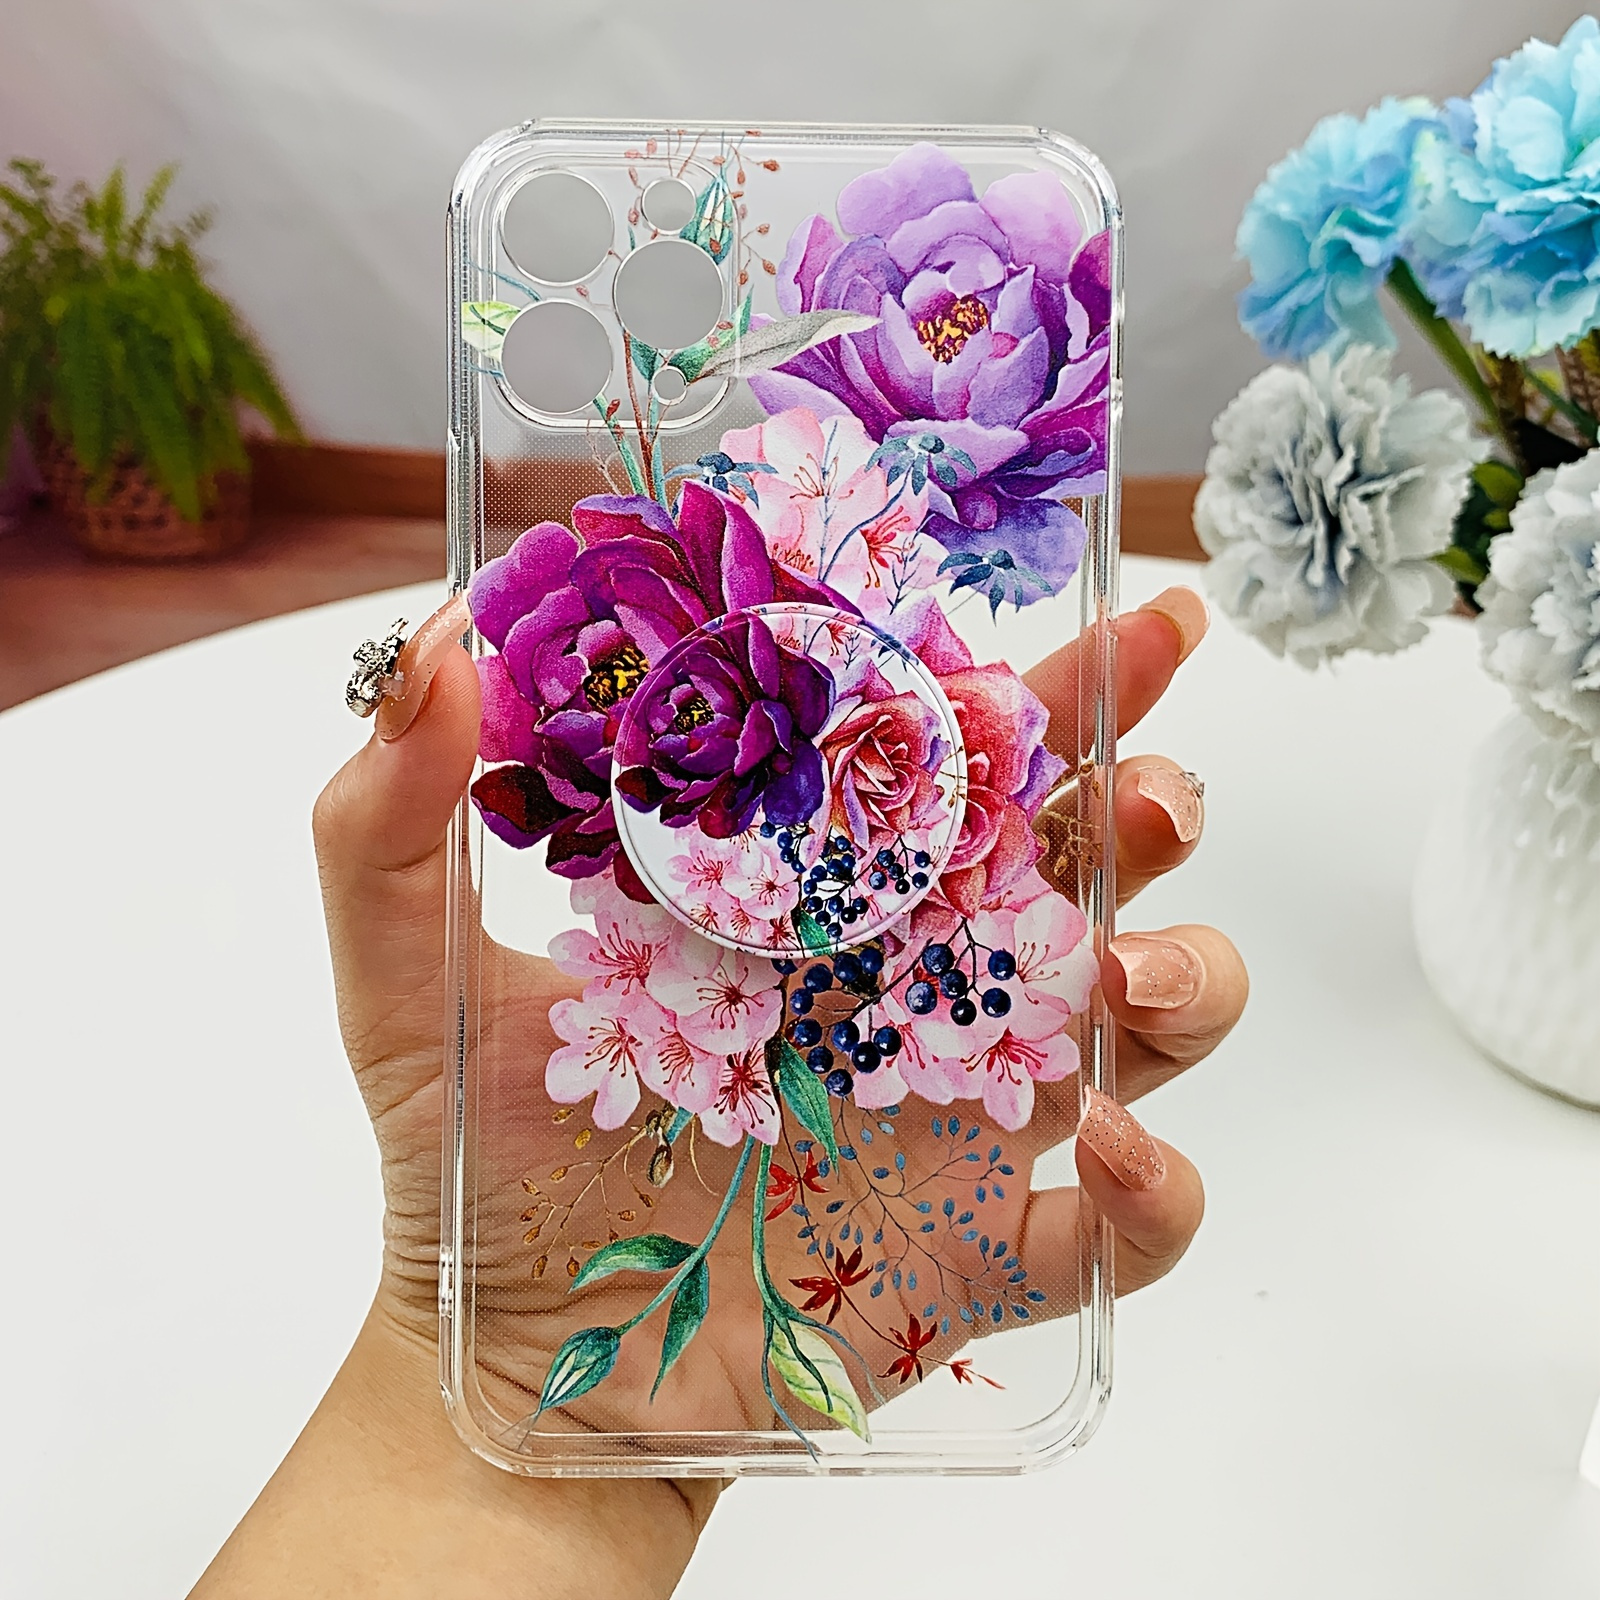 

Vibrant Flower Pattern Print Transparent Tpu Phone Protective Case (with Folding Stand) Anti-fall Phone Case For Iphone Sereies Phones Gift For Birthday/easter/president's Day/boy/girlfriends